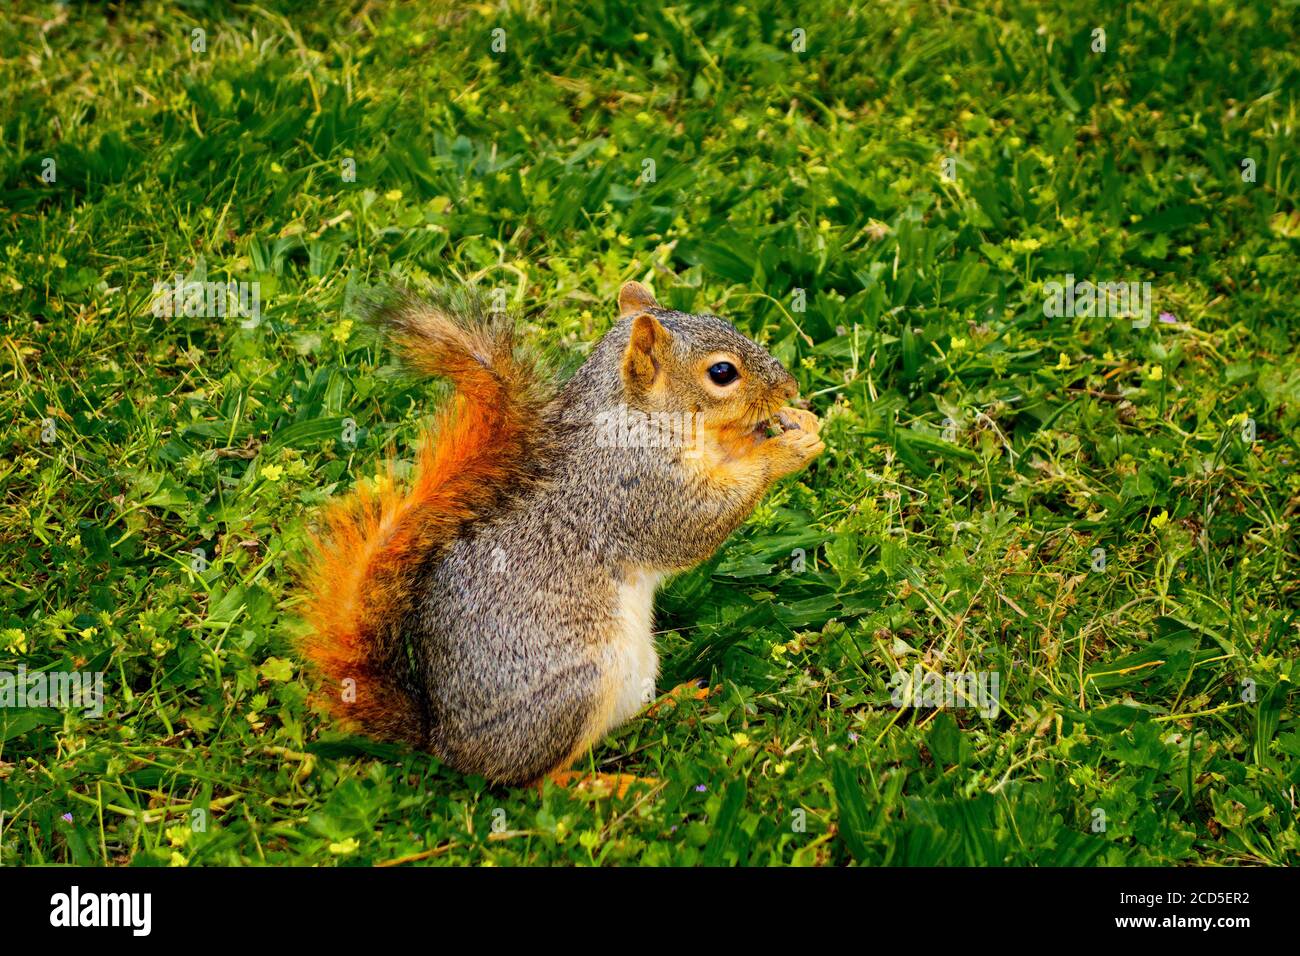 Squirrel eating nut on green grass Stock Photo